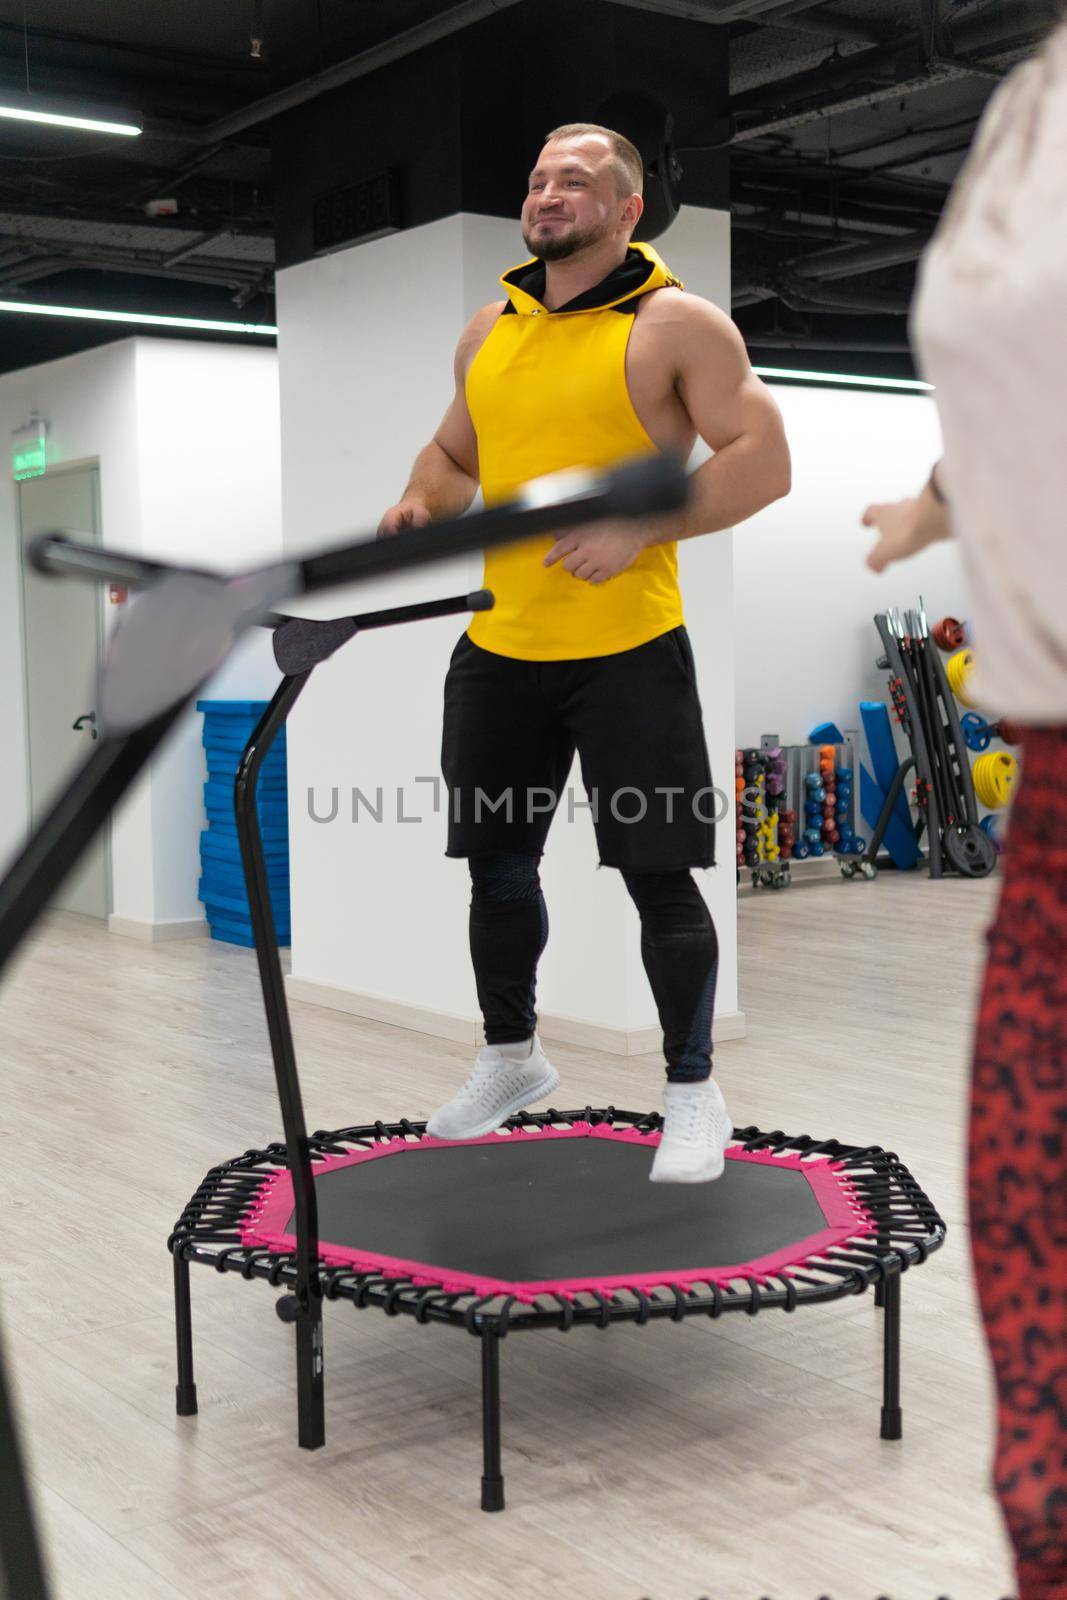 Women's and men's group on a sports trampoline, fitness training, healthy life - a concept trampoline group batut girl men, for female athletic from training from teamwork motion, smiling happiness. Studio bodycare indoor, colored